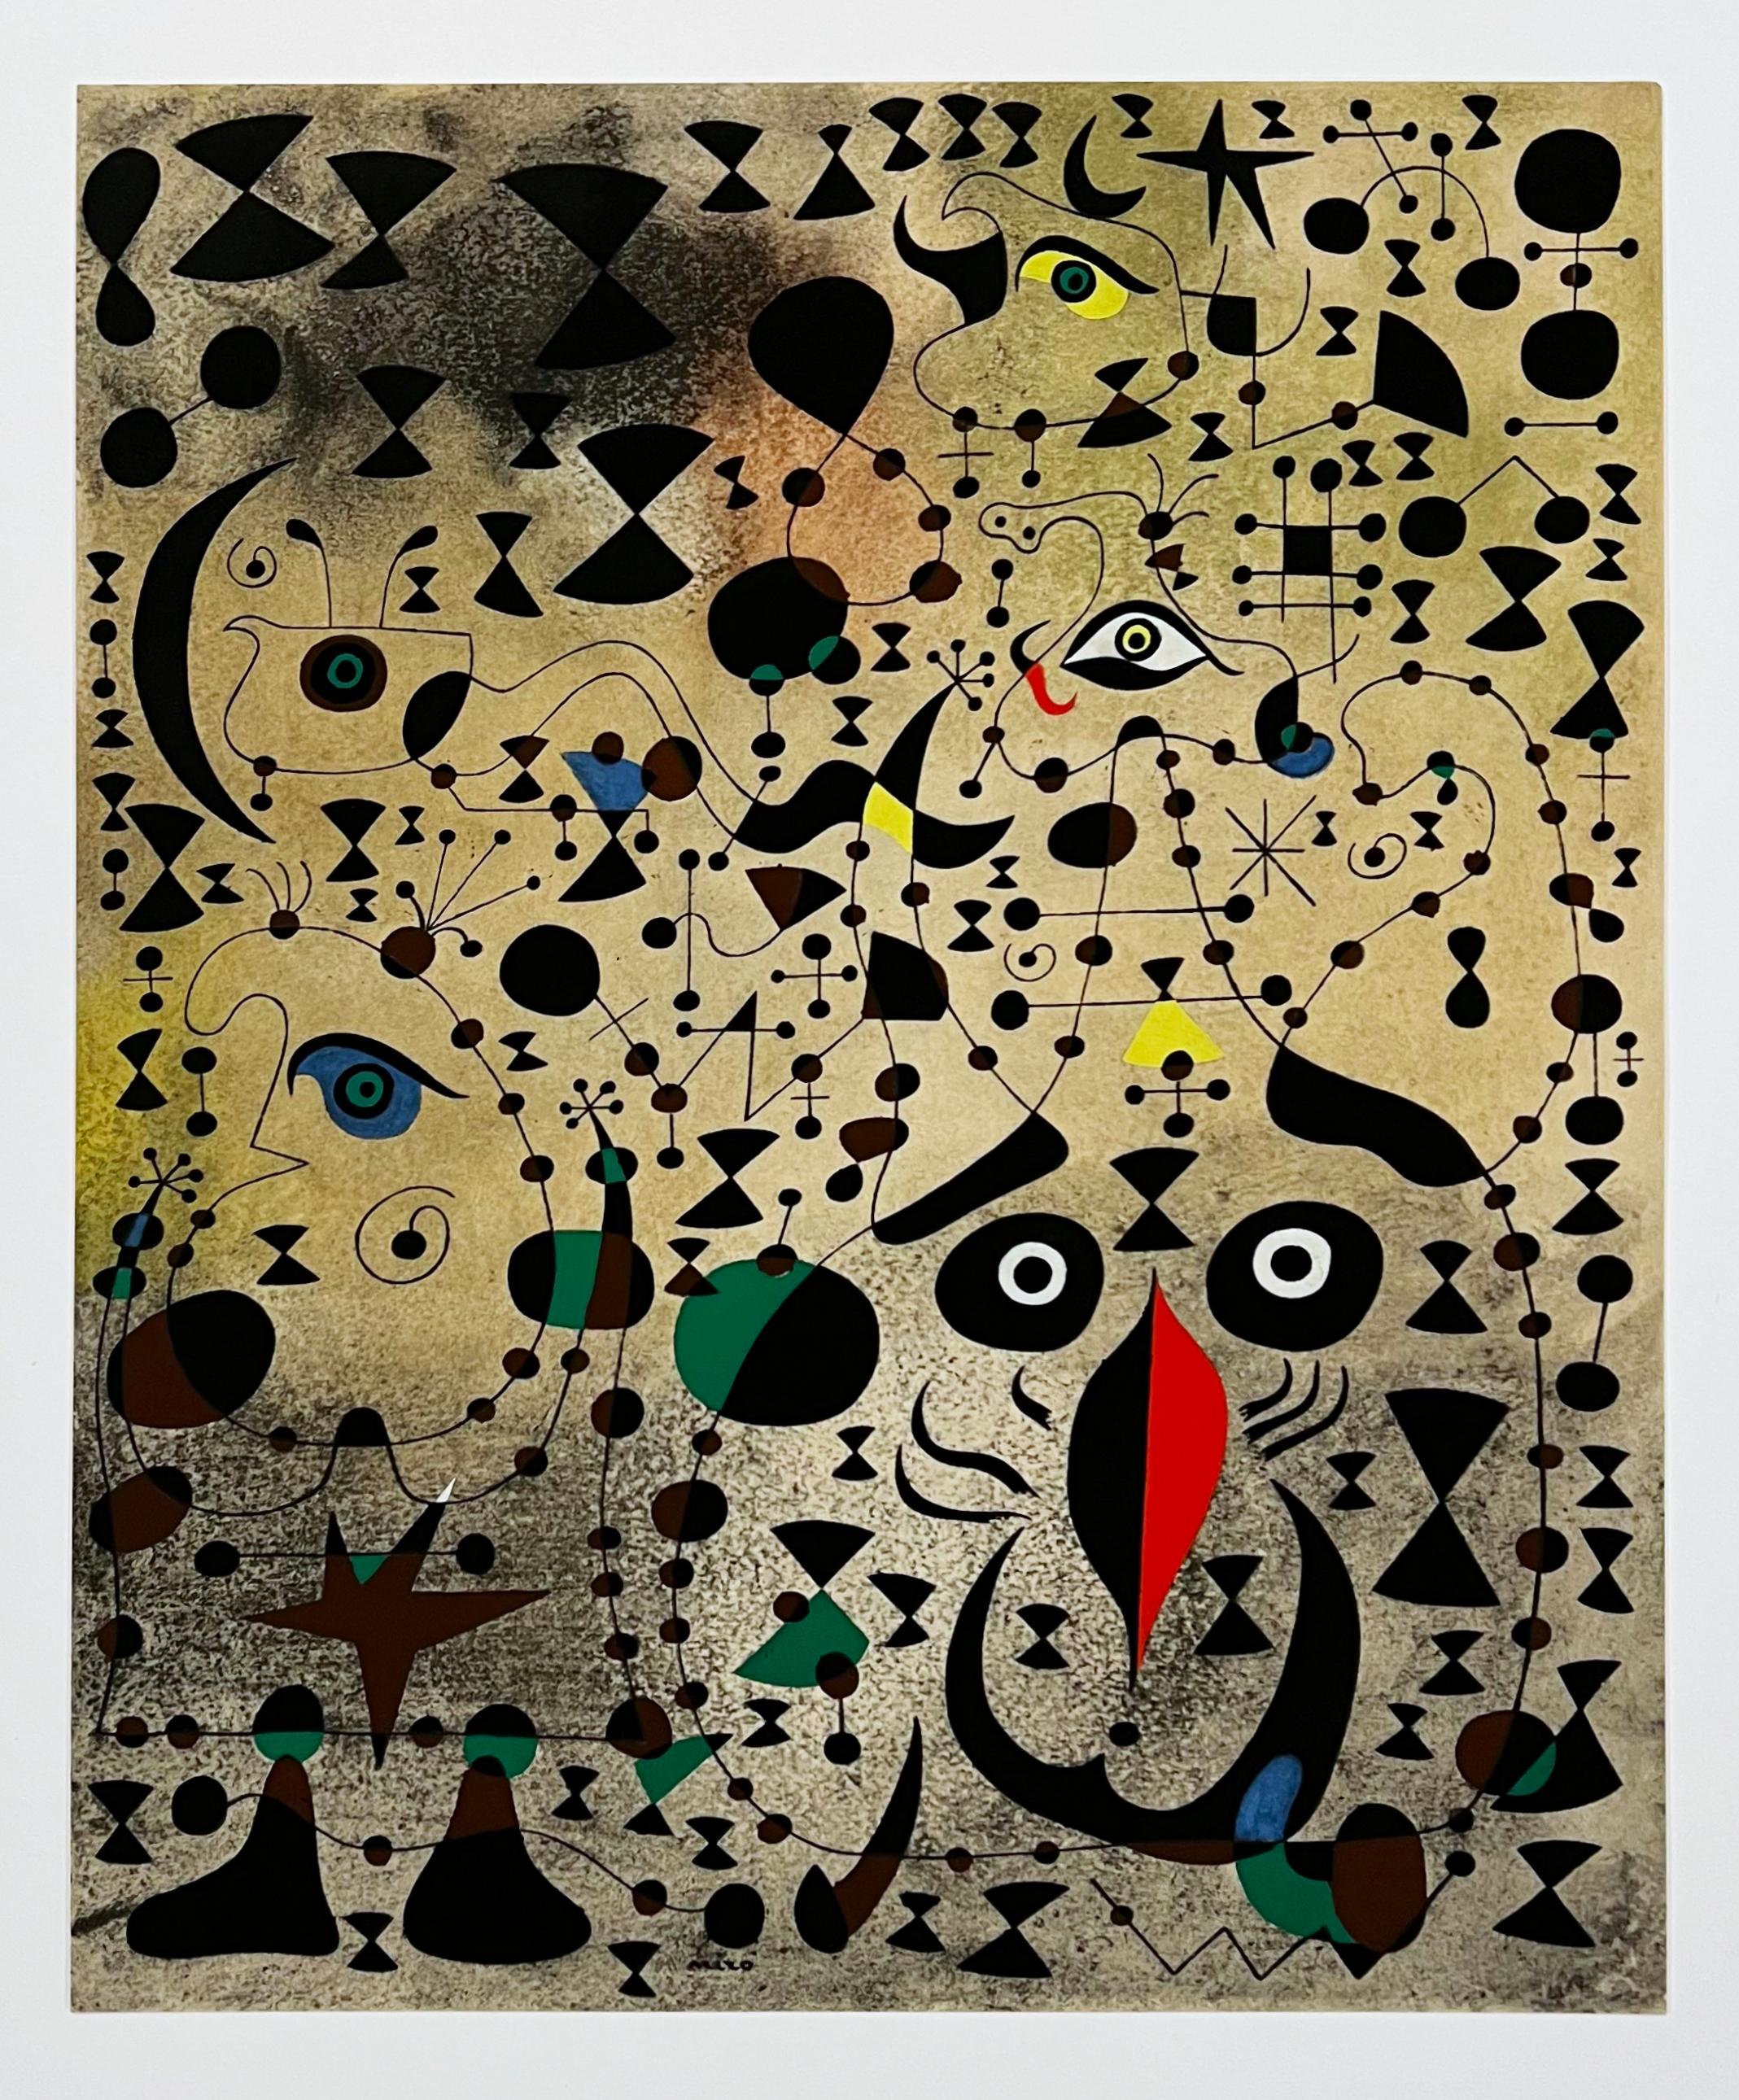 Joan Miro (after) Plate XX from 1959 Constellations - Print by (after) Joan Miró